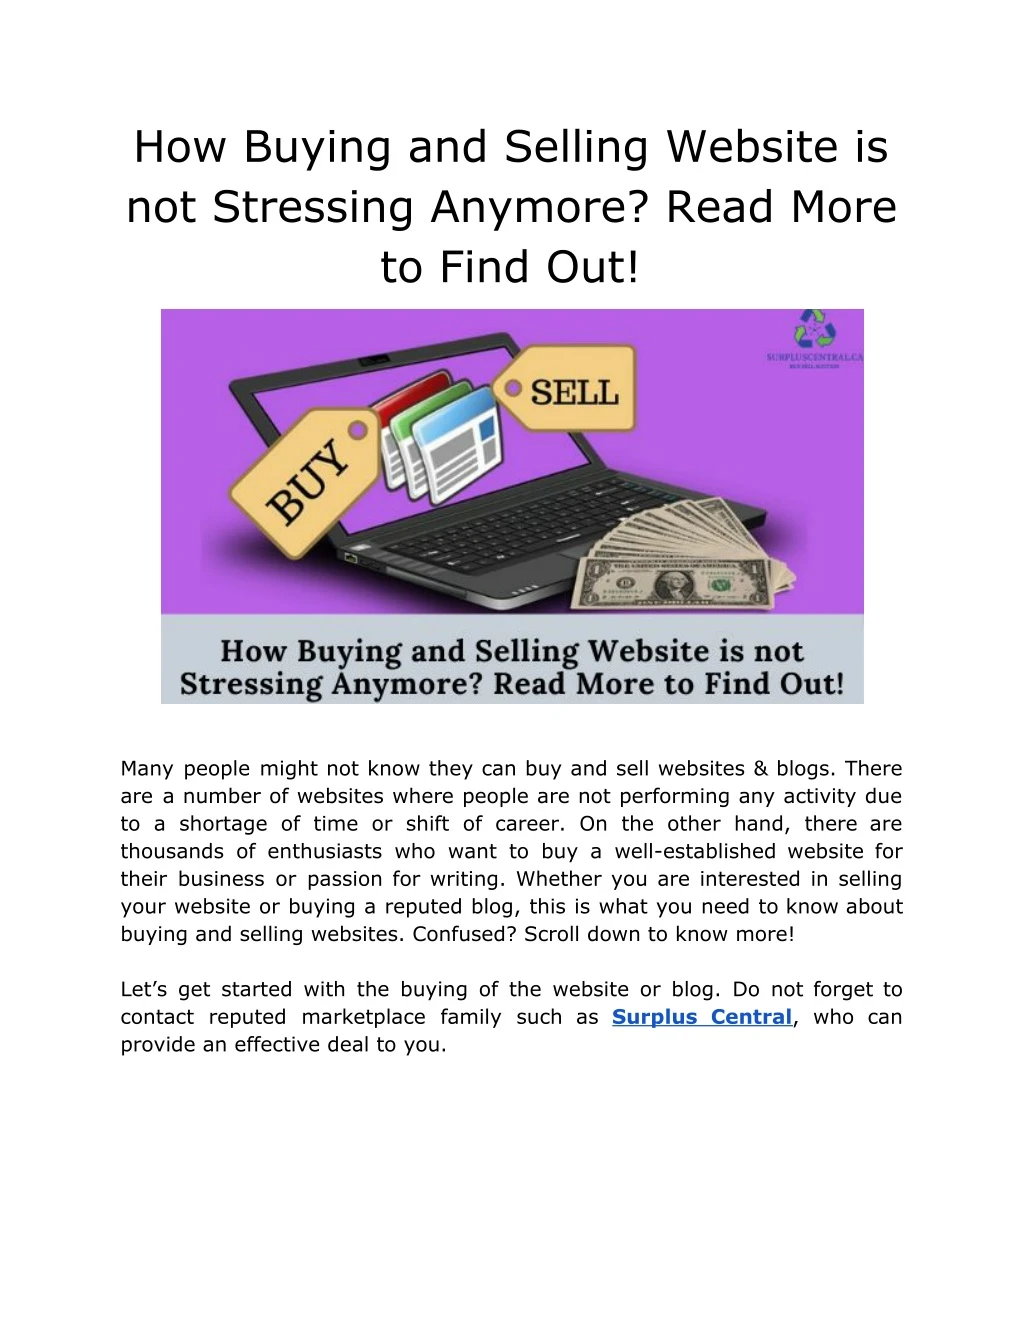 how buying and selling website is not stressing